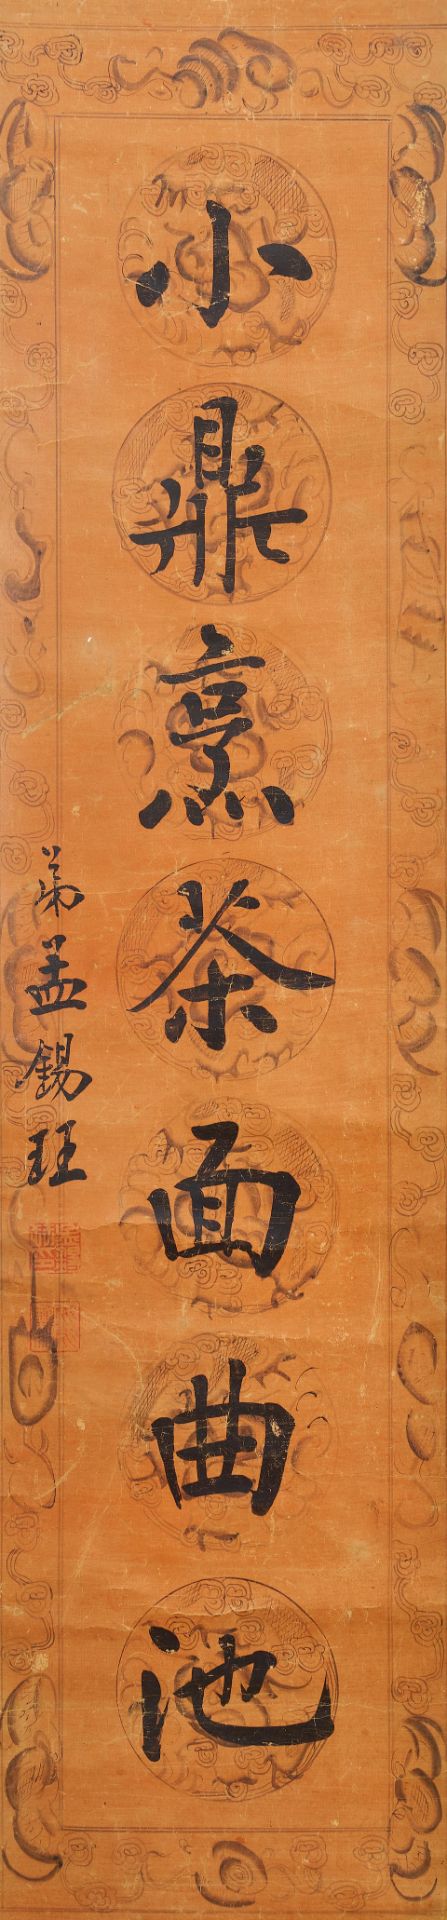 Meng Xijue (1875-?) Calligraphy Couplet in Regular Style (2) - Image 2 of 3